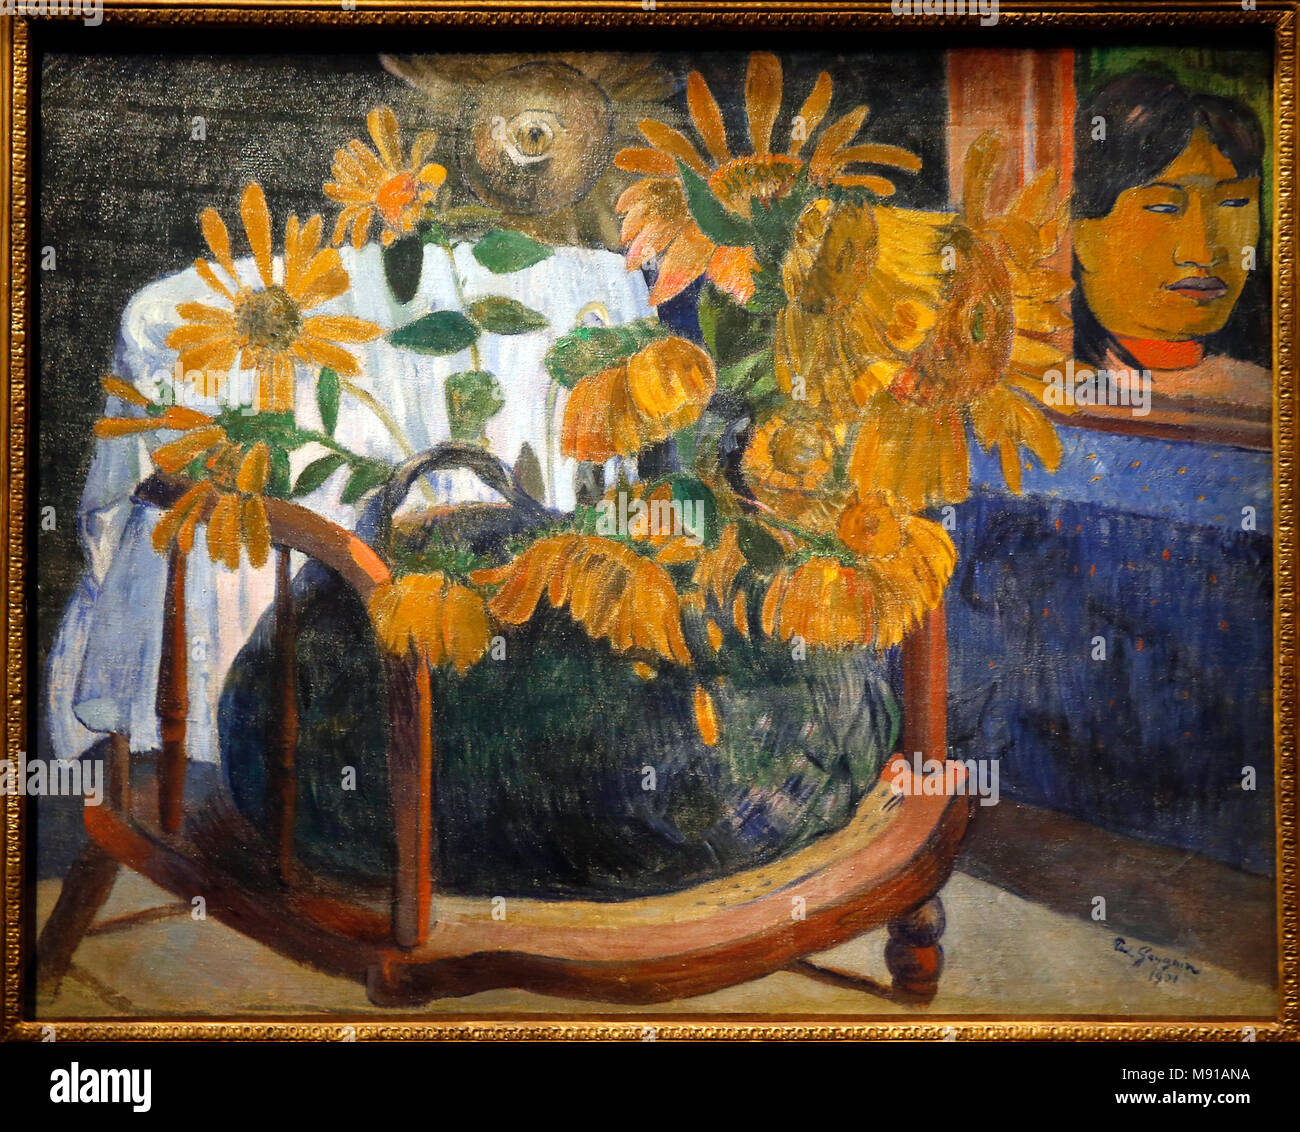 Paul Gauguin, Sunflowers, Tahiti, 1901, oil on canvas. Shchukin Collection, Ermitage museum, St Petersburg. Shot while exhibited in Paris, France. Stock Photo